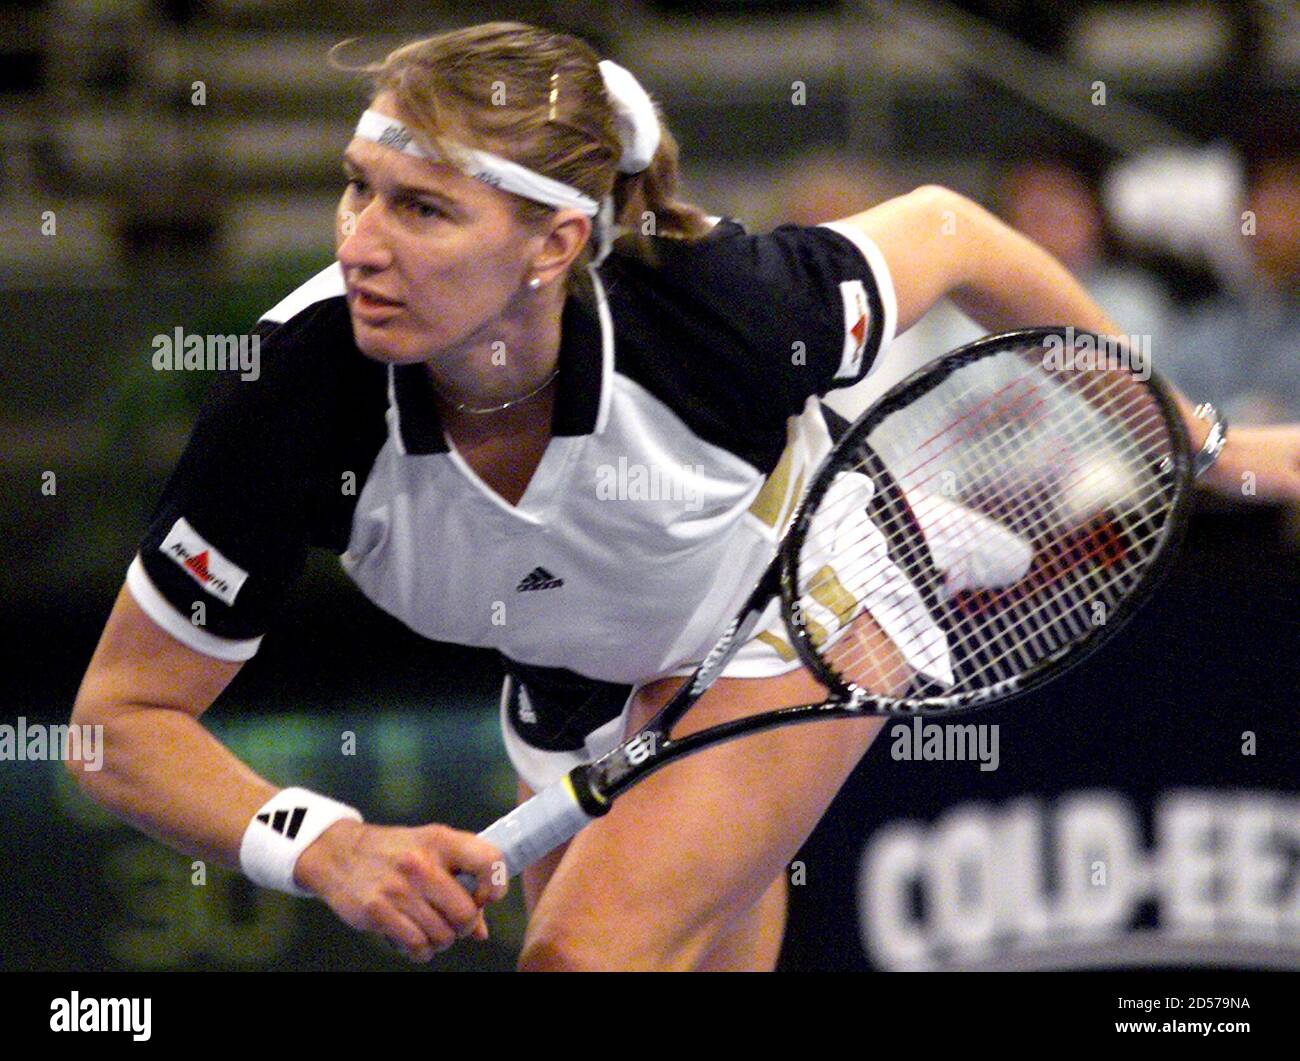 Germany's Steffi Graf follows through on a serve to [Lindsay Davenport]  during their semifinals match at the Chase Championships of the Corel WTA  Tour at New York's Madison Square Garden, November 21.